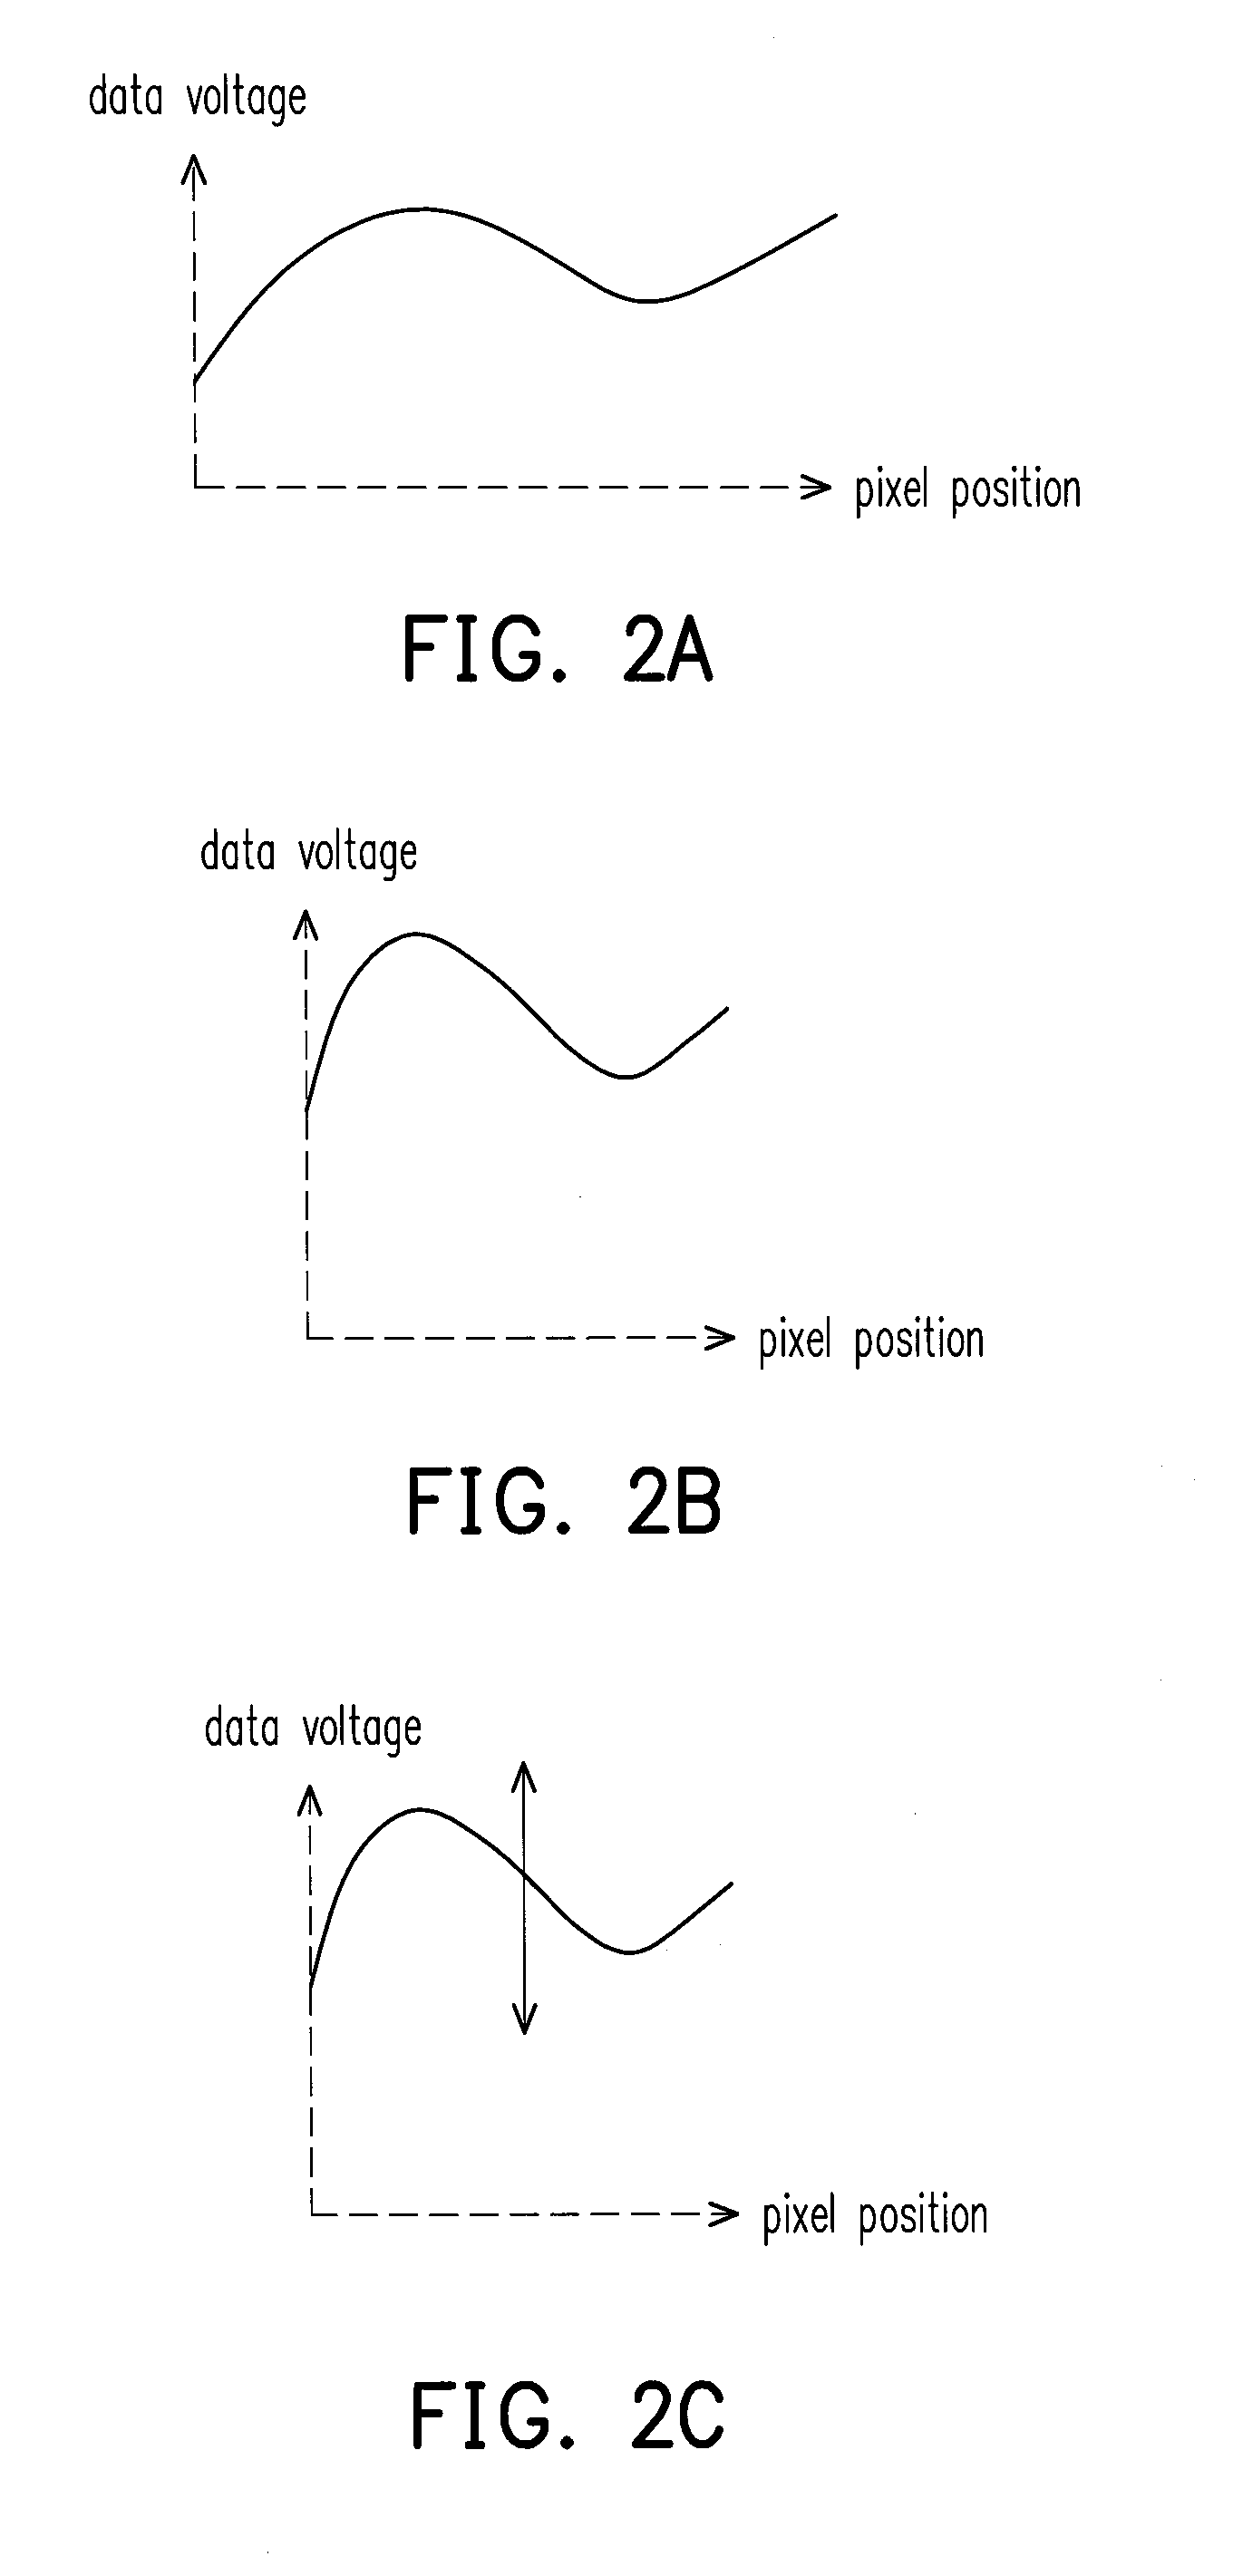 Image sensing apparatus and black level controlling method thereof